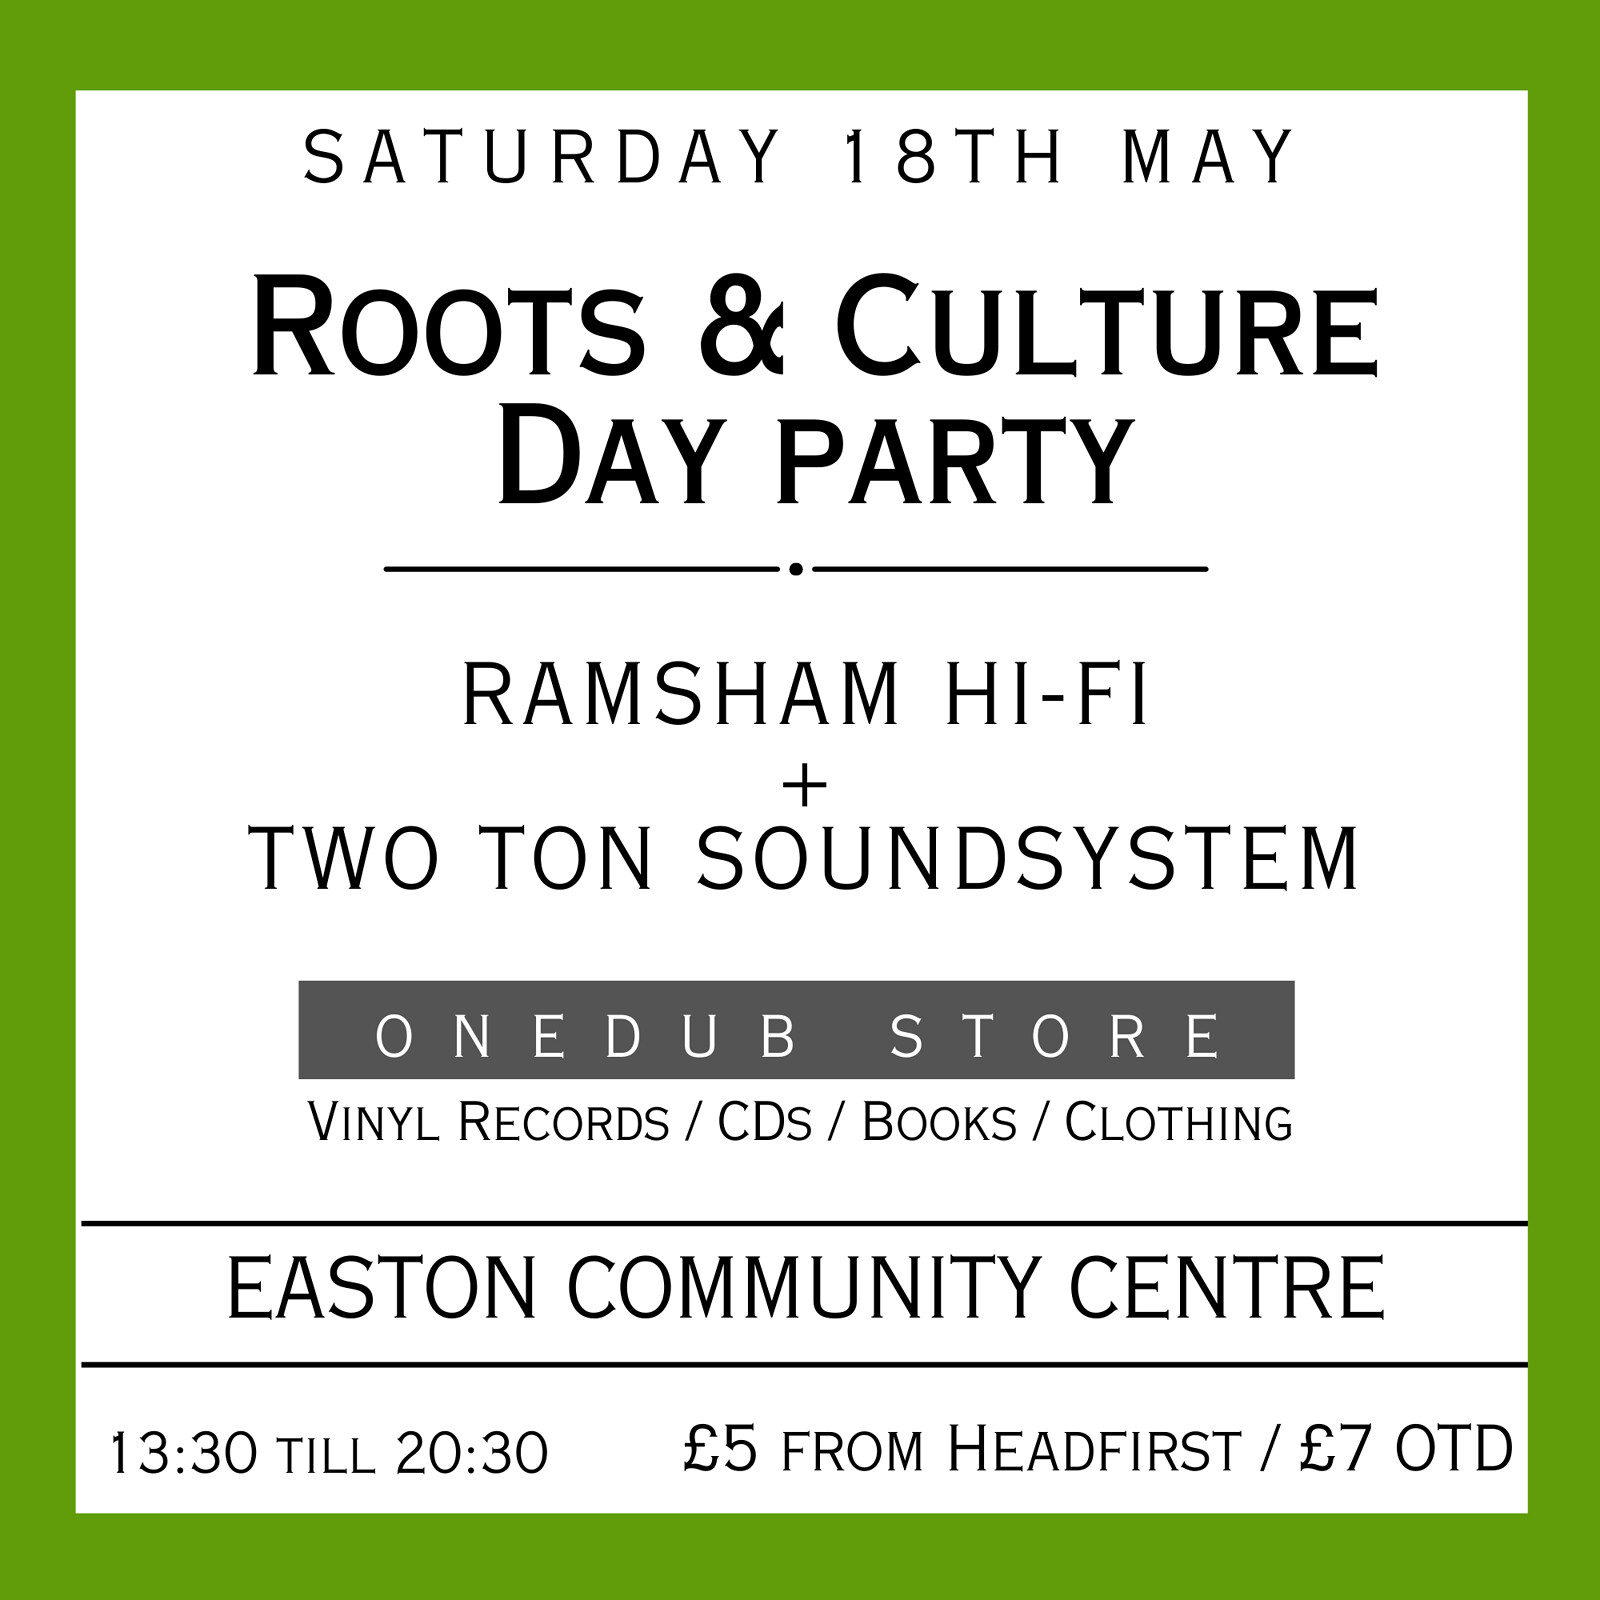 Roots & Culture Day Party at Easton Community Centre